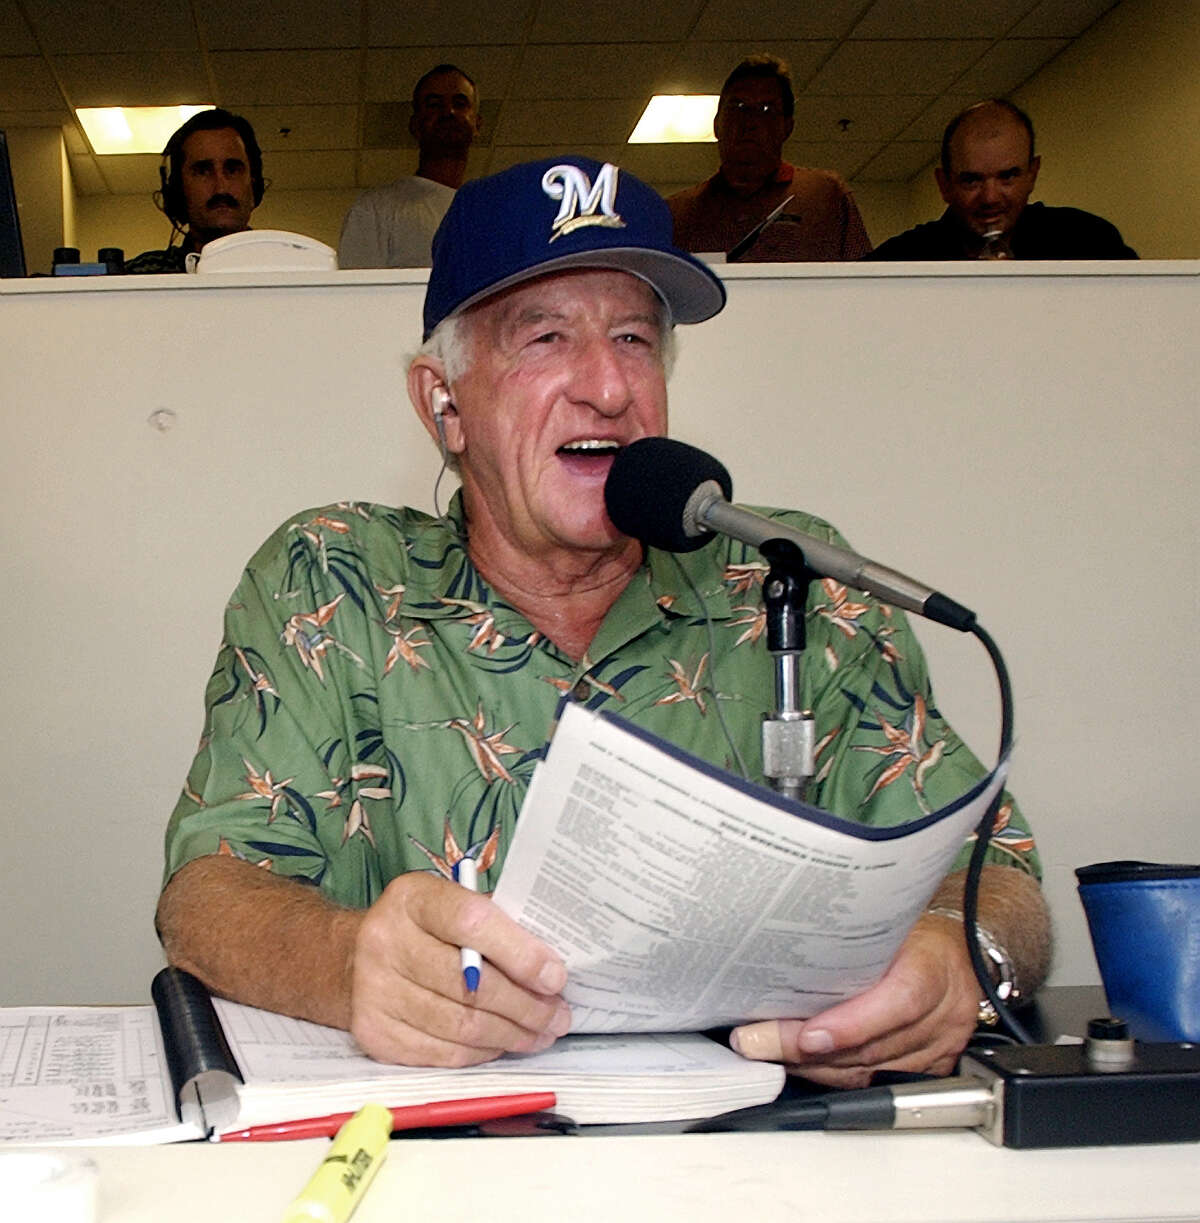 * ADVANCE FOR WEEKEND EDITIONS JULY 26 27 ** Milwaukee Brewers' radio announcer Bob Uecker works out of the radio booth during a game against the Pittsburgh Pirates Monday, July 7, 2003, at Miller Park in Milwaukee. "Mr. Baseball," as Uecker was dubbed by Johnny Carson, will become a Hall of Famer. (AP Photo/Morry Gash)